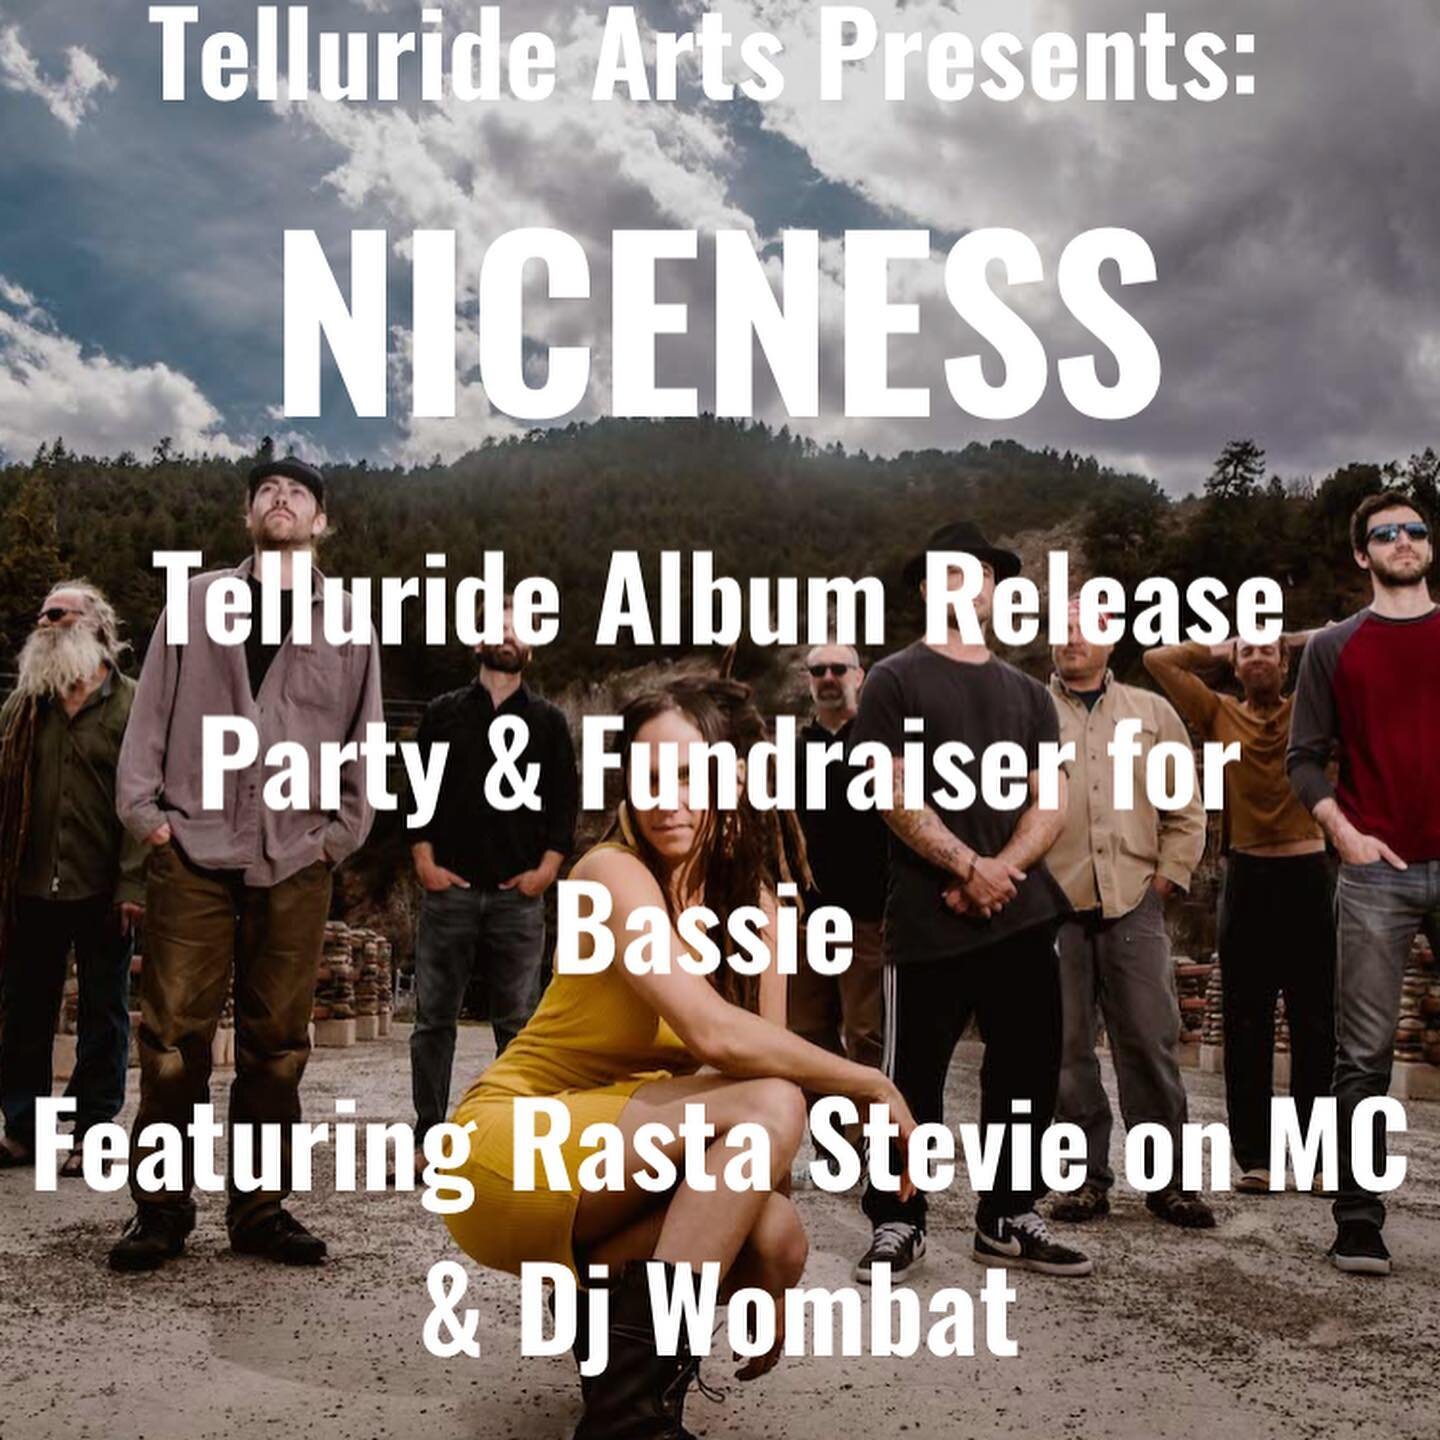 I am so excited and honored to be opening for Niceness.  New album release party and a benefit to help Bassie ❤️💛💚Get your tickets and don&rsquo;t miss an amazing night of Reggae &amp; good vibes.  Most of all&hellip;. Let&rsquo;s dance and celebra